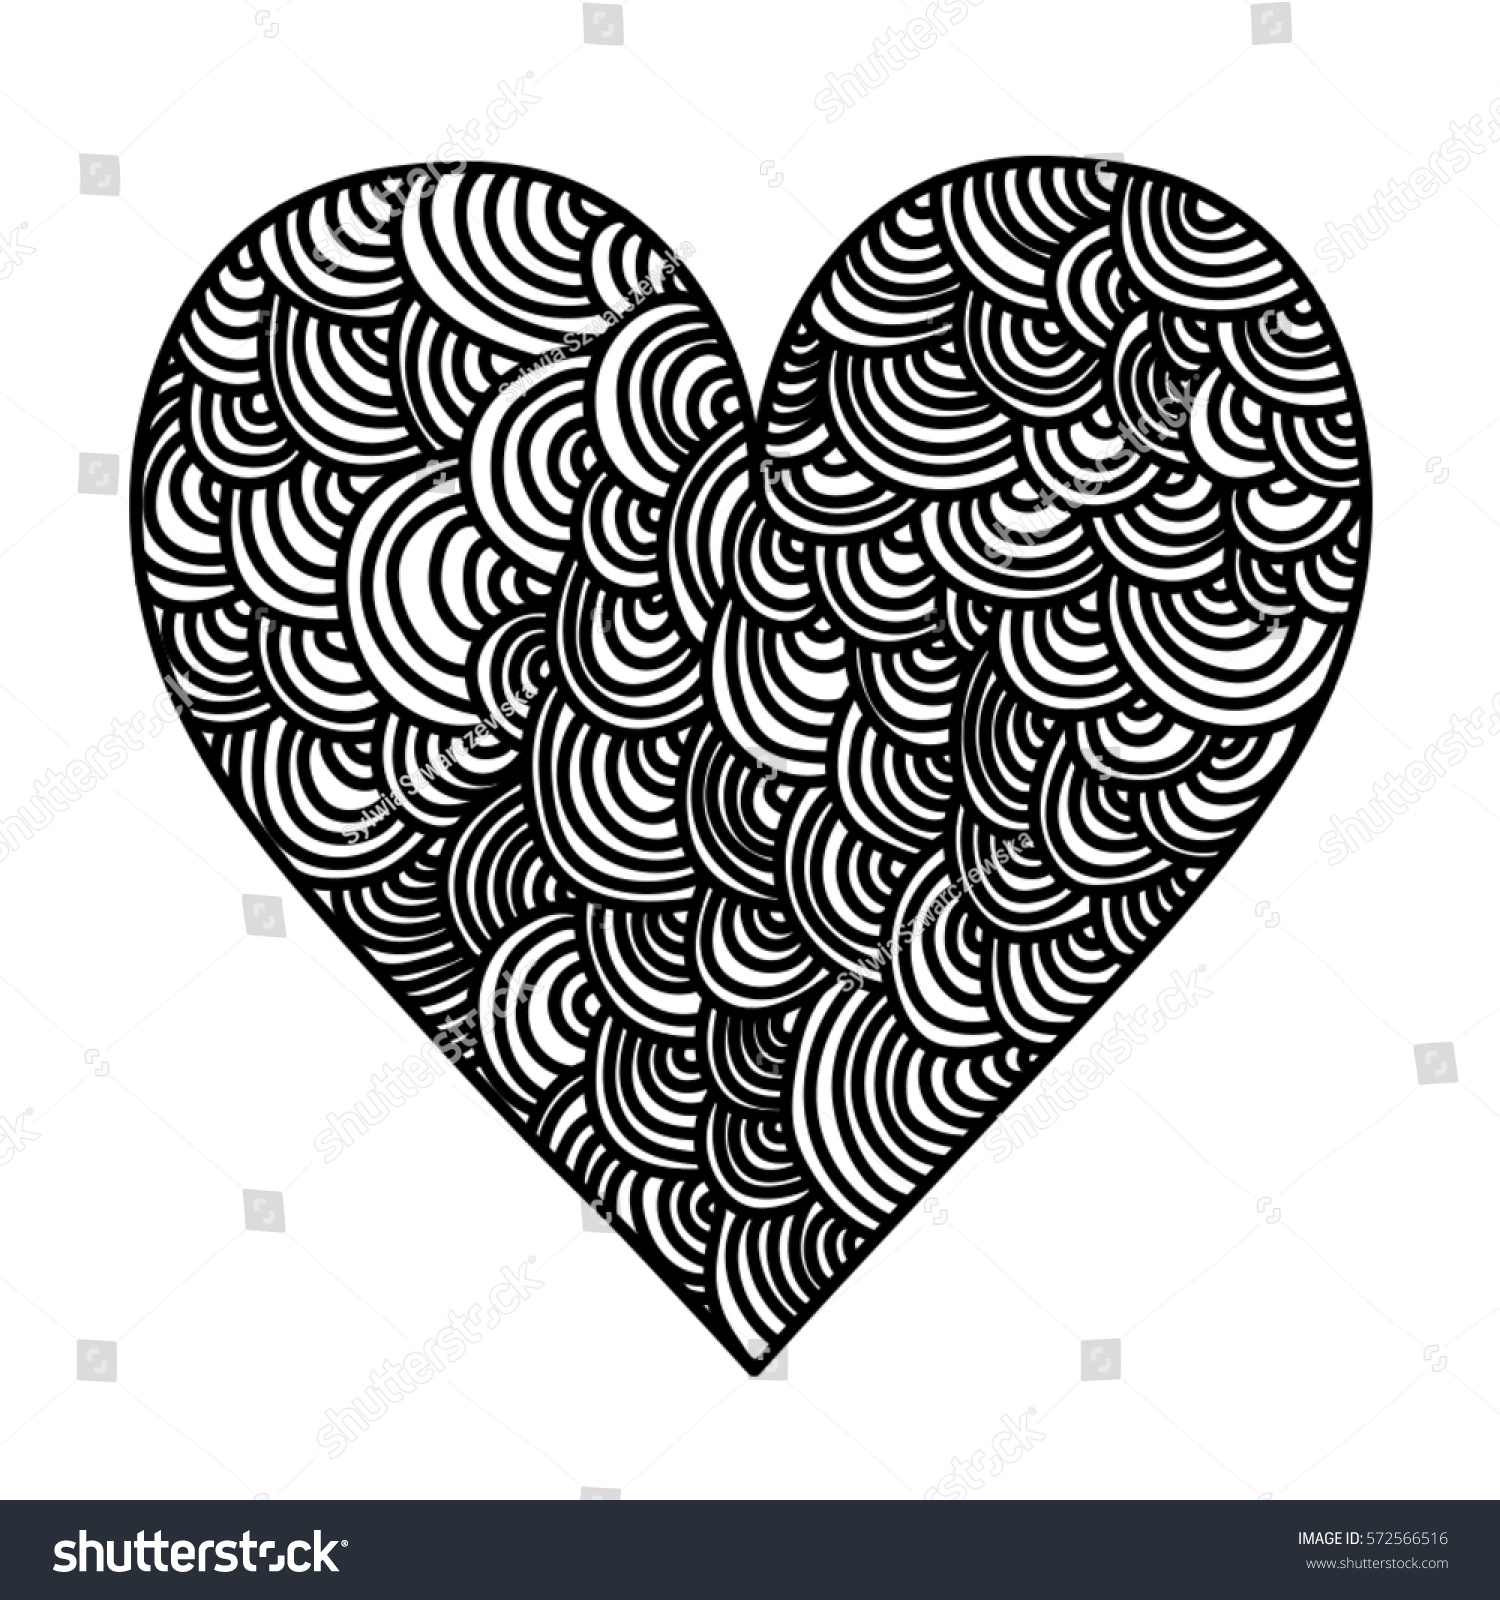 Heart drawn with a doddle art technique - rainbows   #572566516